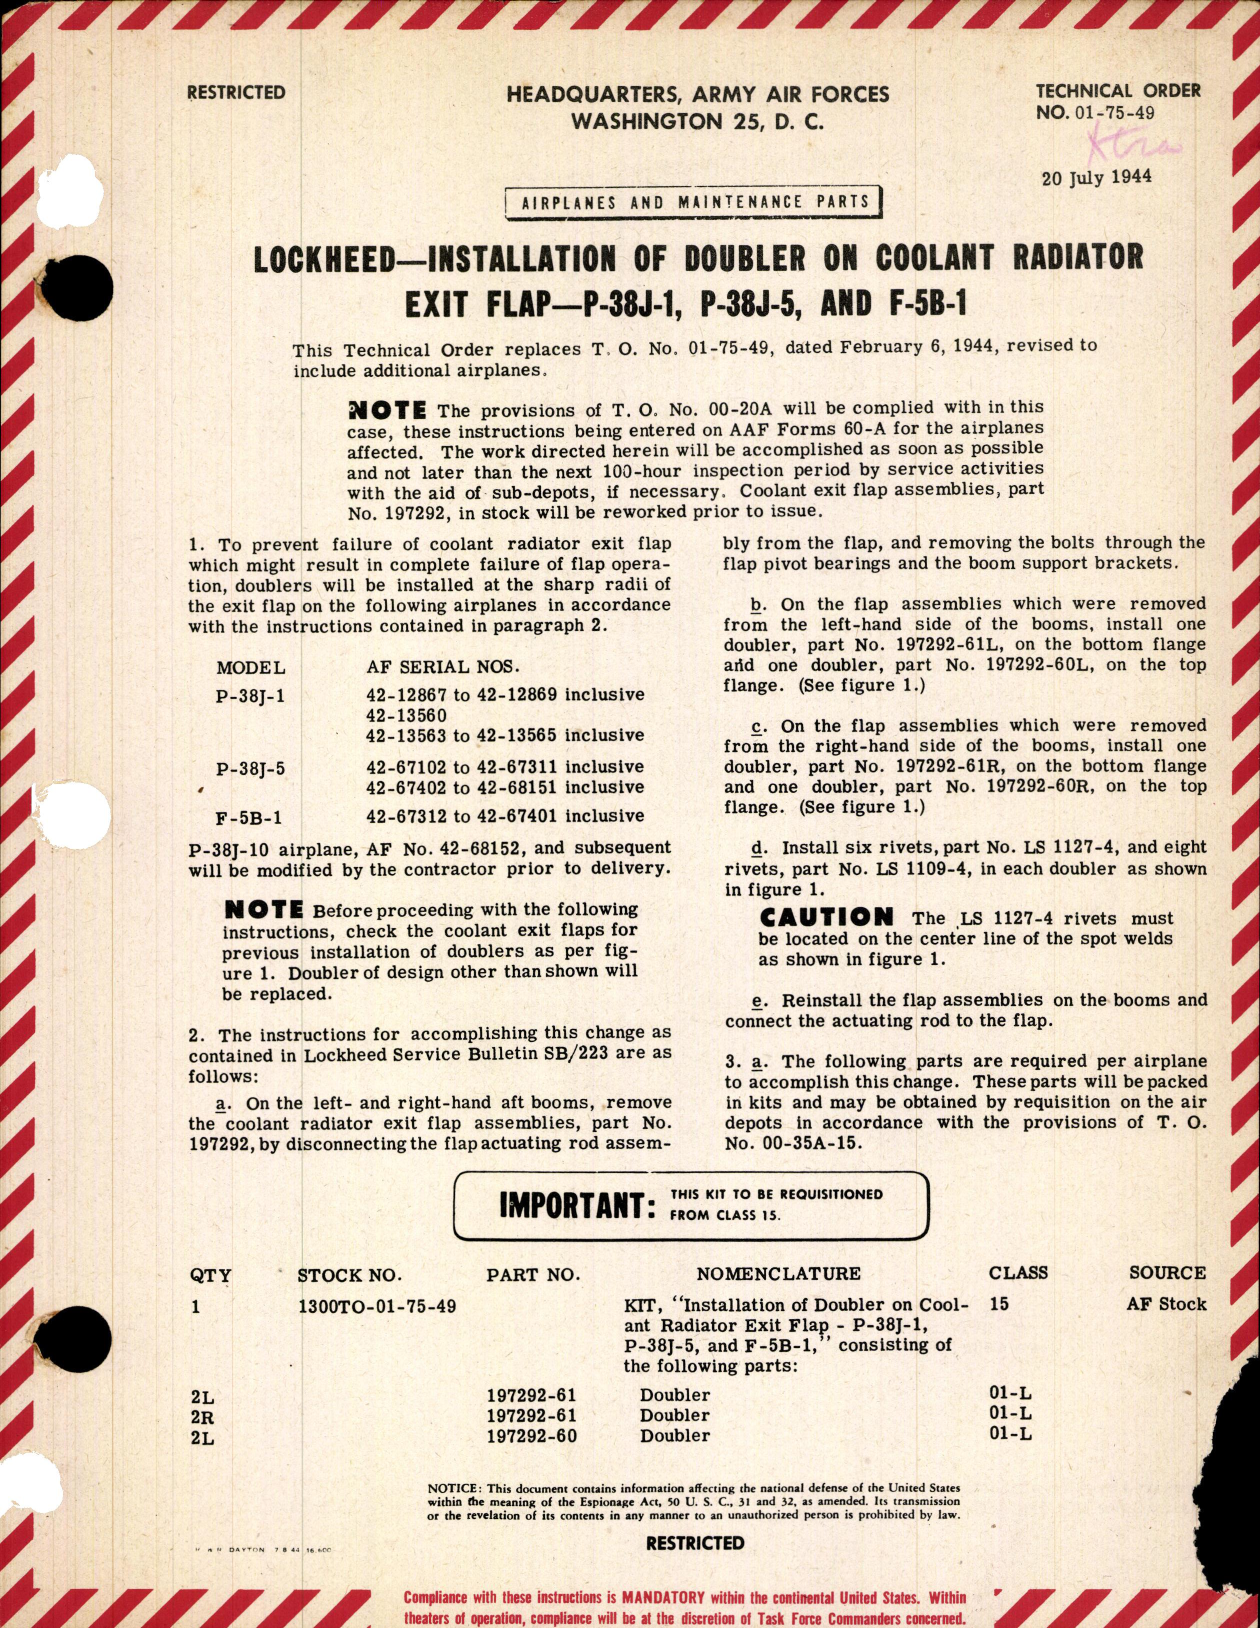 Sample page 1 from AirCorps Library document: Installation of Doubler on Coolant Radiator Exit Flap for P-38J-1, -5, and F-5B-1